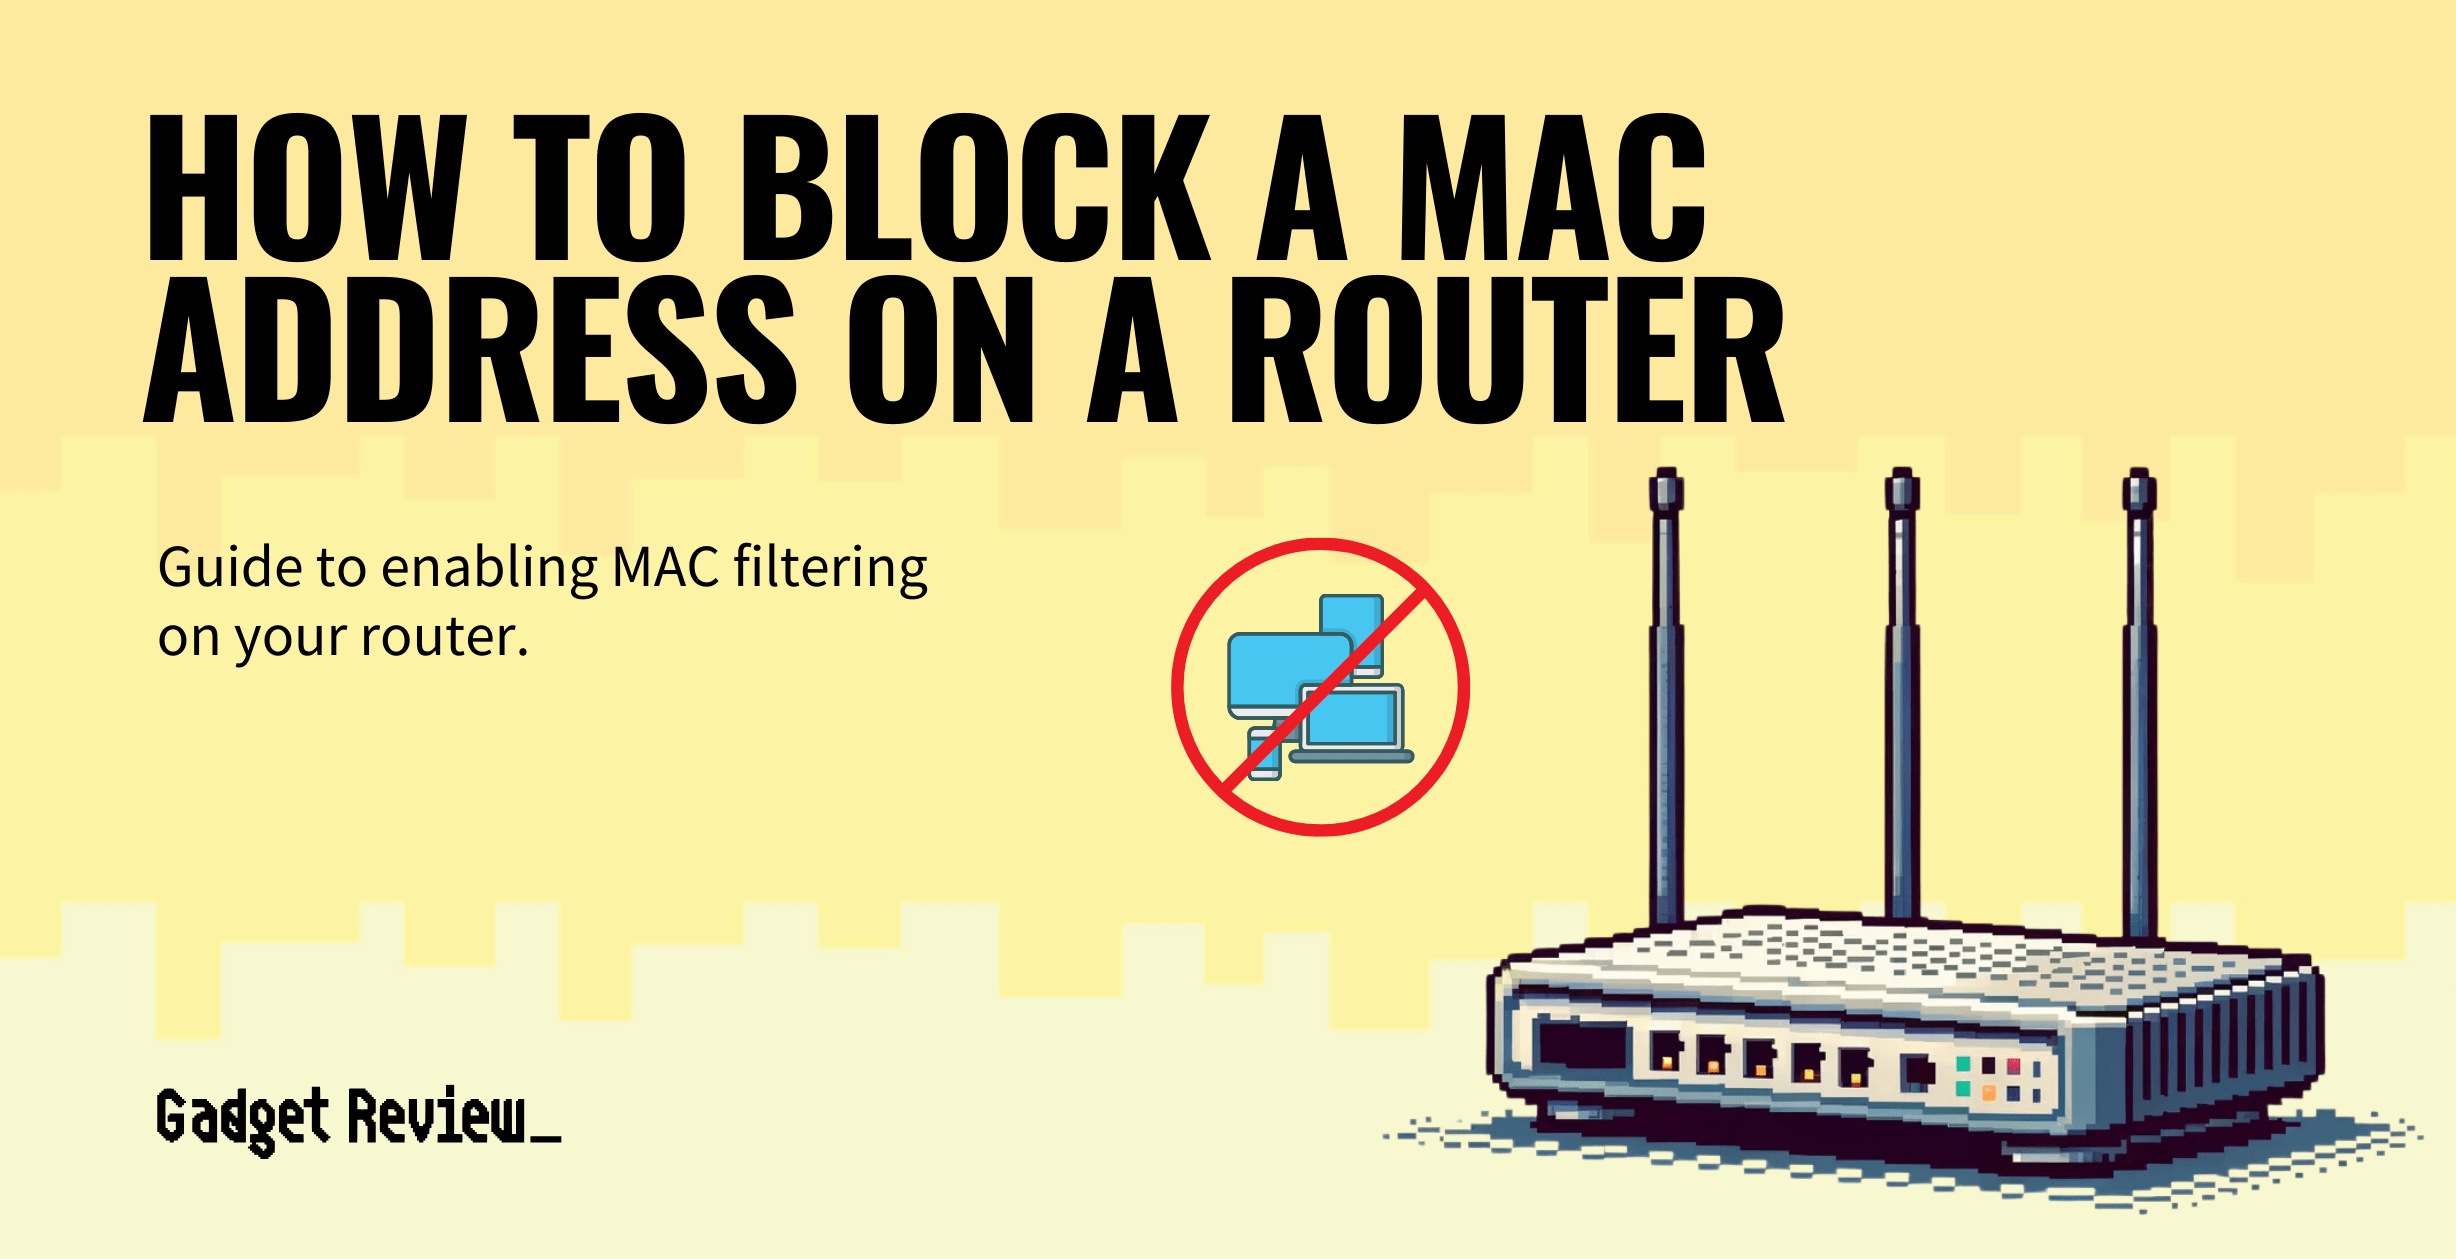 How to Block a MAC Address on a Router